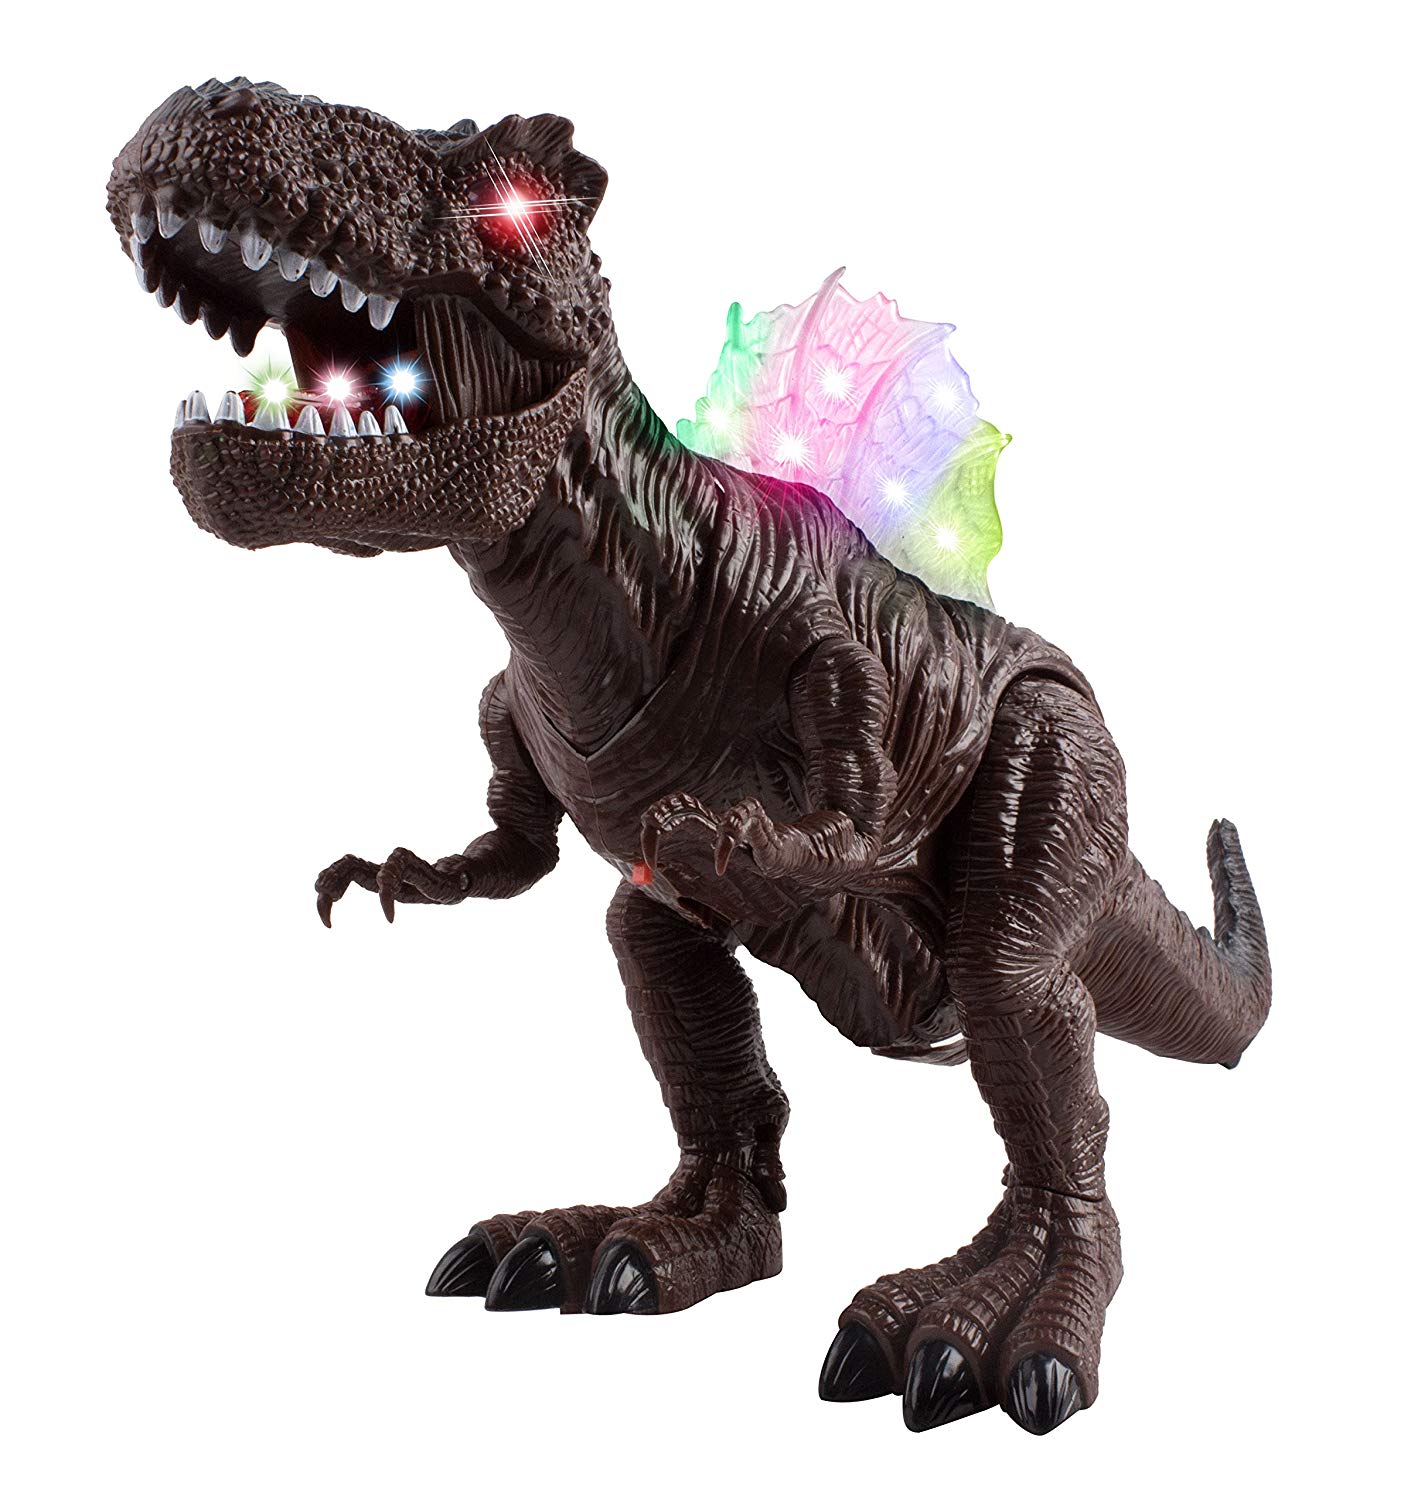 Vokodo Walking T-Rex Robot Dinosaur with Lights and Sounds Interactive Kids Smart Robotic Pet Tyrannosaurus Rex Toy Easy to Use Function Battery Operated Great Gift for Children Boys Girls Toddlers